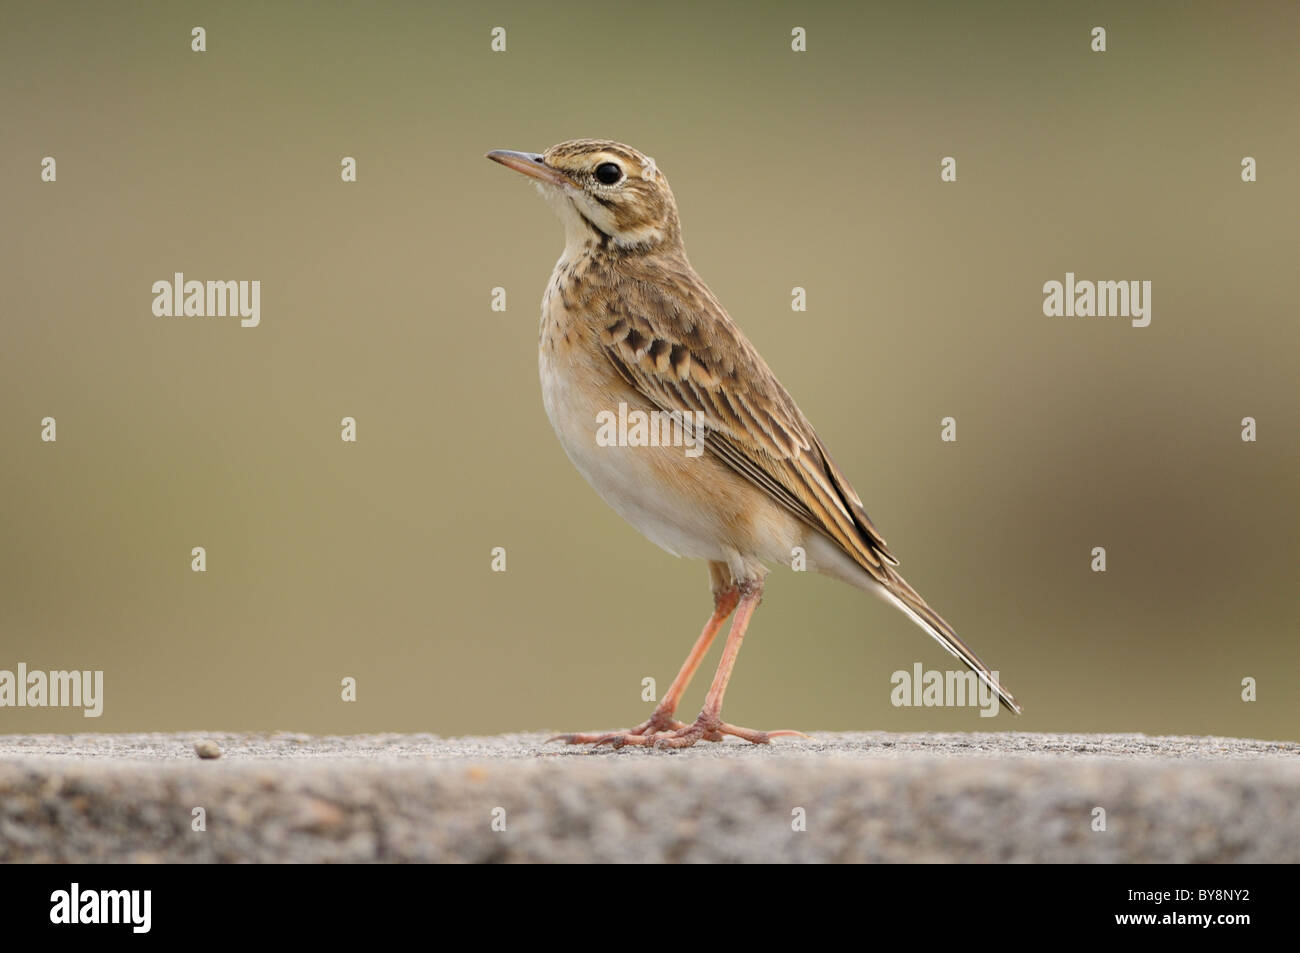 A paddy field pipit resting on a stone wall Stock Photo